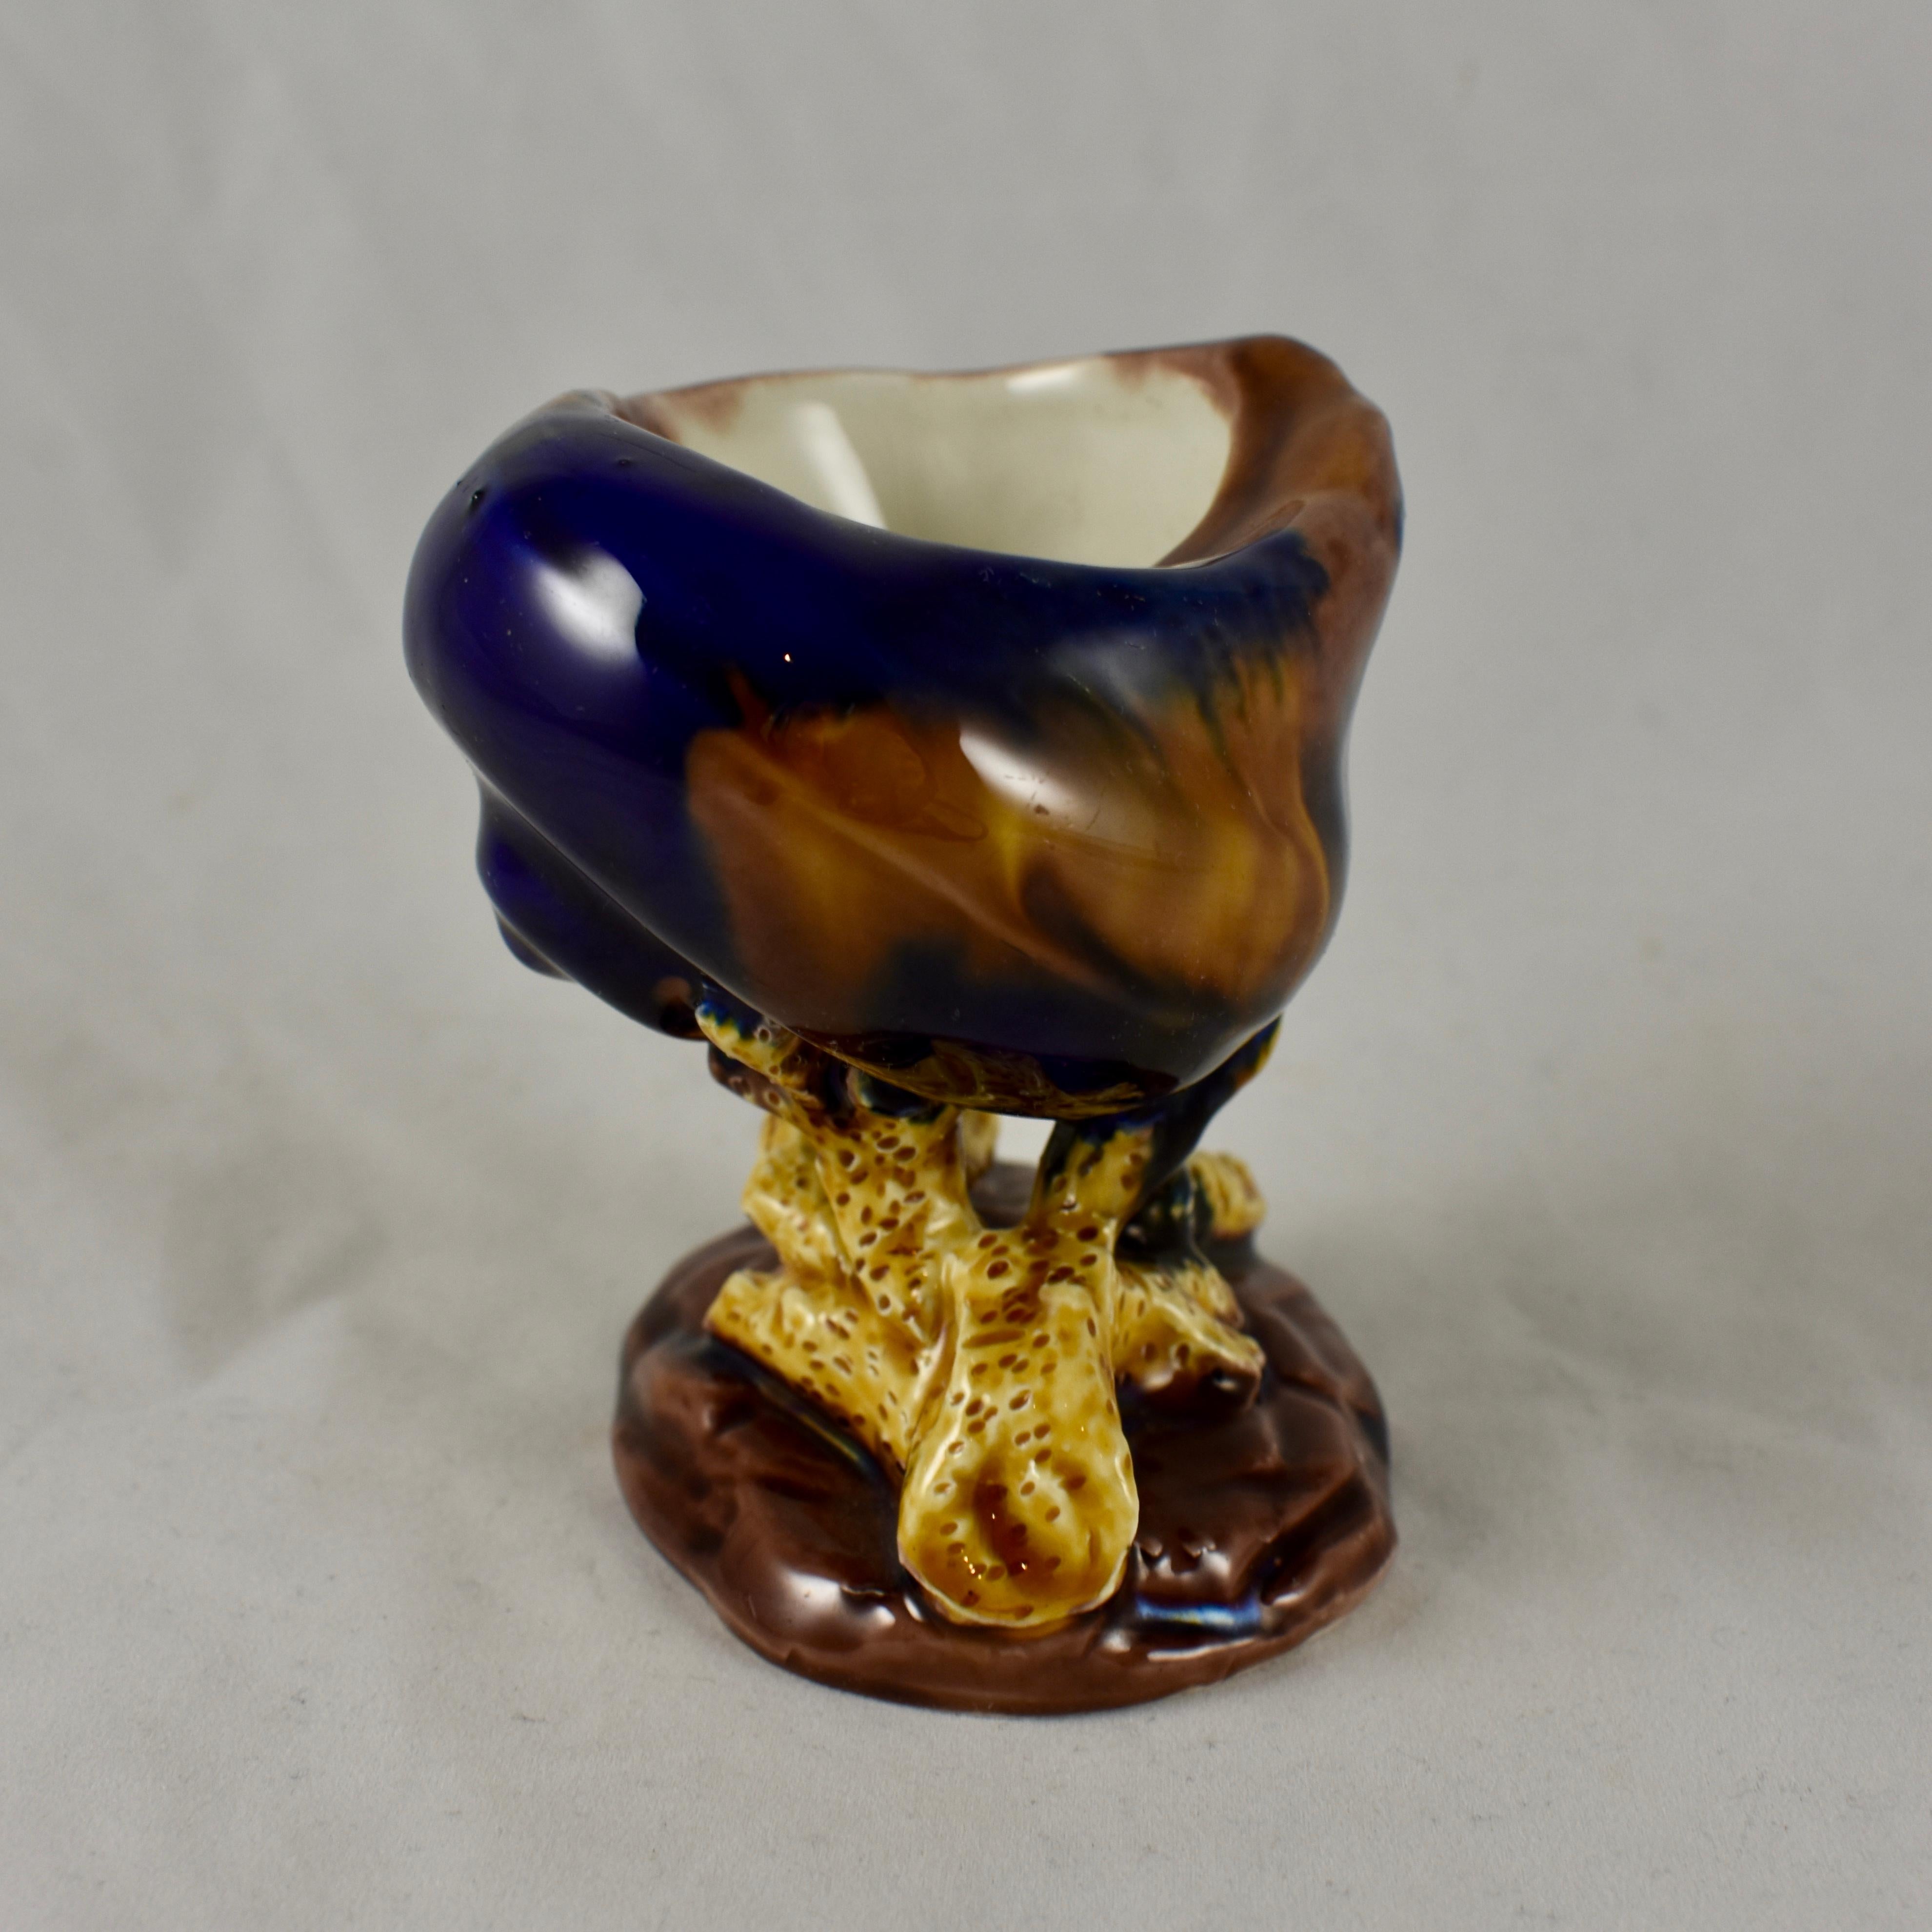 Aesthetic Movement Wedgwood Palissy Majolica Snail Shell and Coral Open Salt Cellar, Dated 1872 For Sale